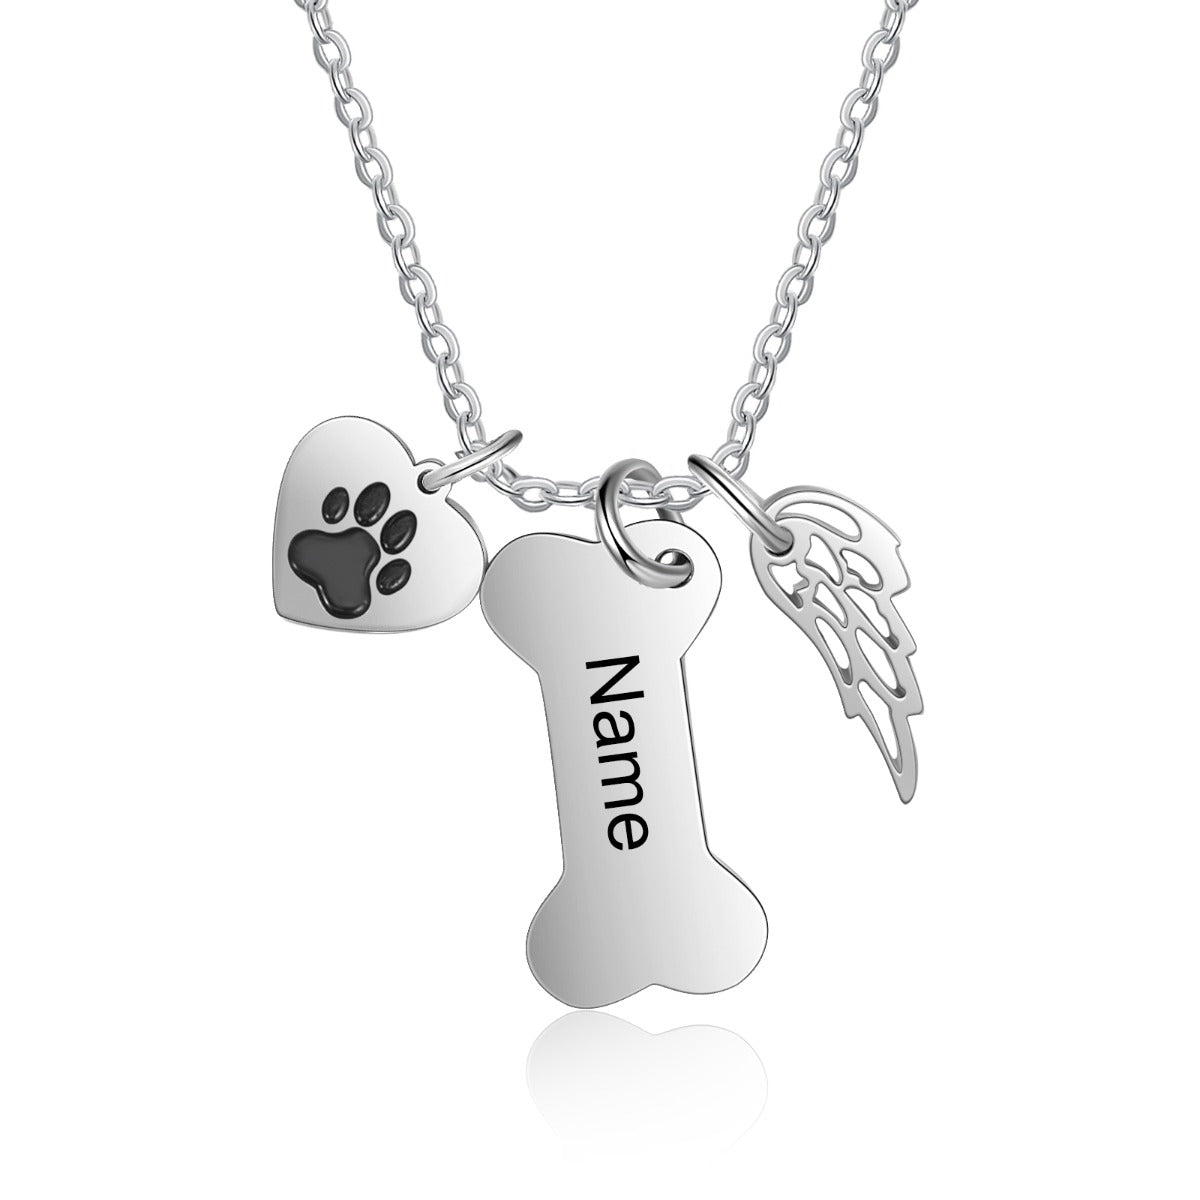 Personalized Stainless Steel Bone Heart Necklace